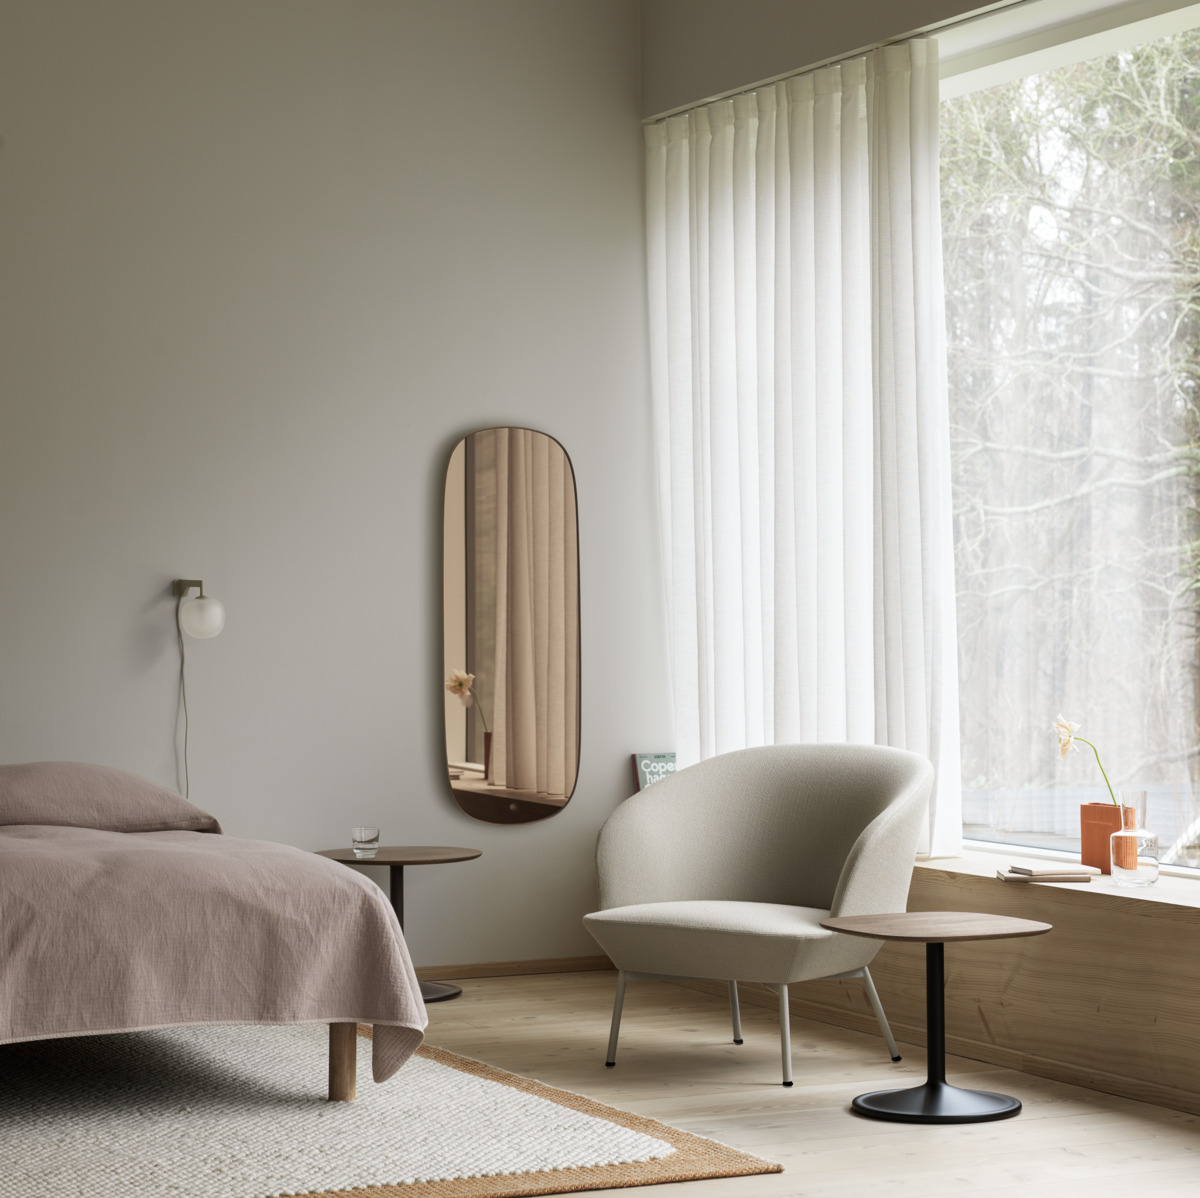 Oslo Lounge Chair w. Grey Tube Base in Vidar 146 - Soft Side Table 45x45 cm in Smoked Solid Wood/Black -  Soft Side Table Ø48 cm in Smoked Solid Wood/Black - Framed Mirror in Rose - Rime Wall Lamp in Grey